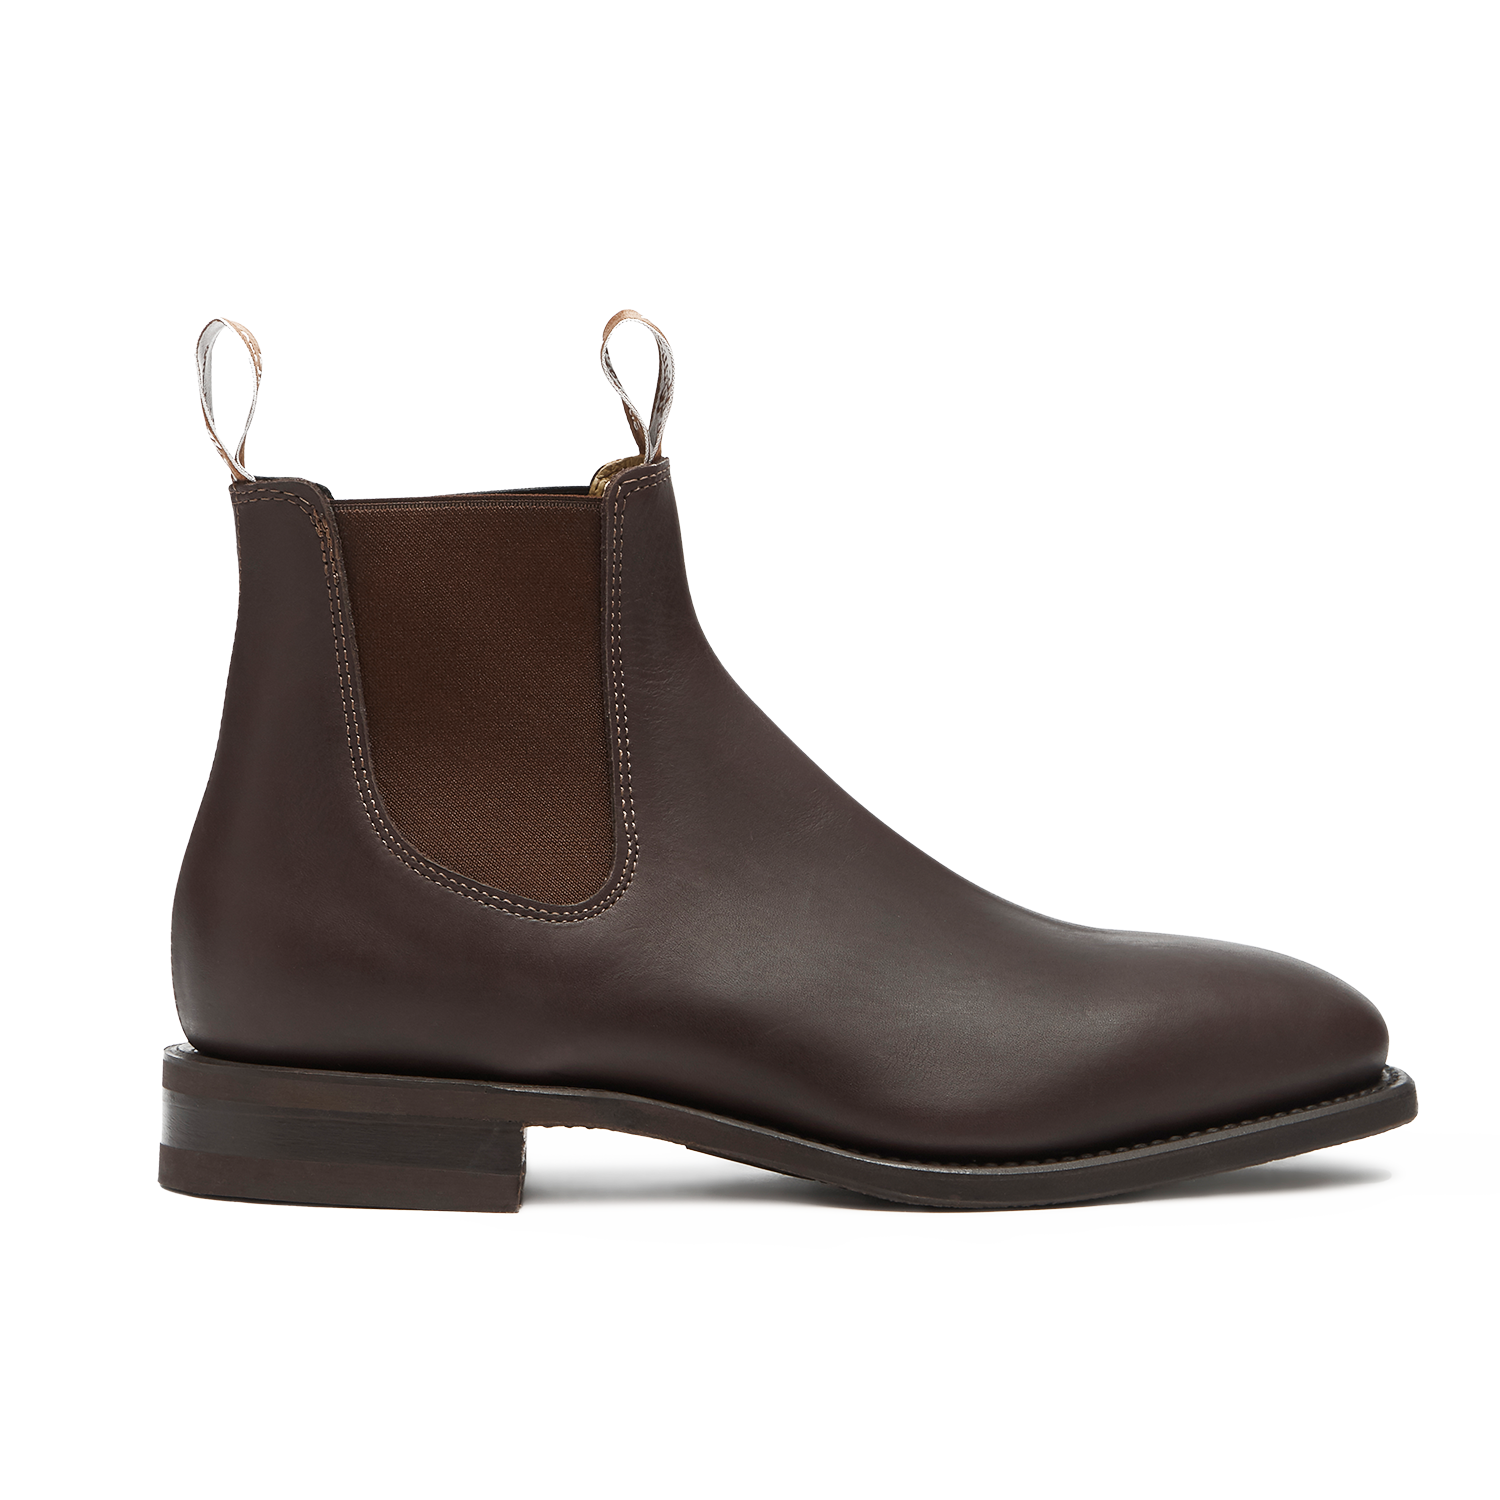 Comfort All-Rounder in Brown Latego